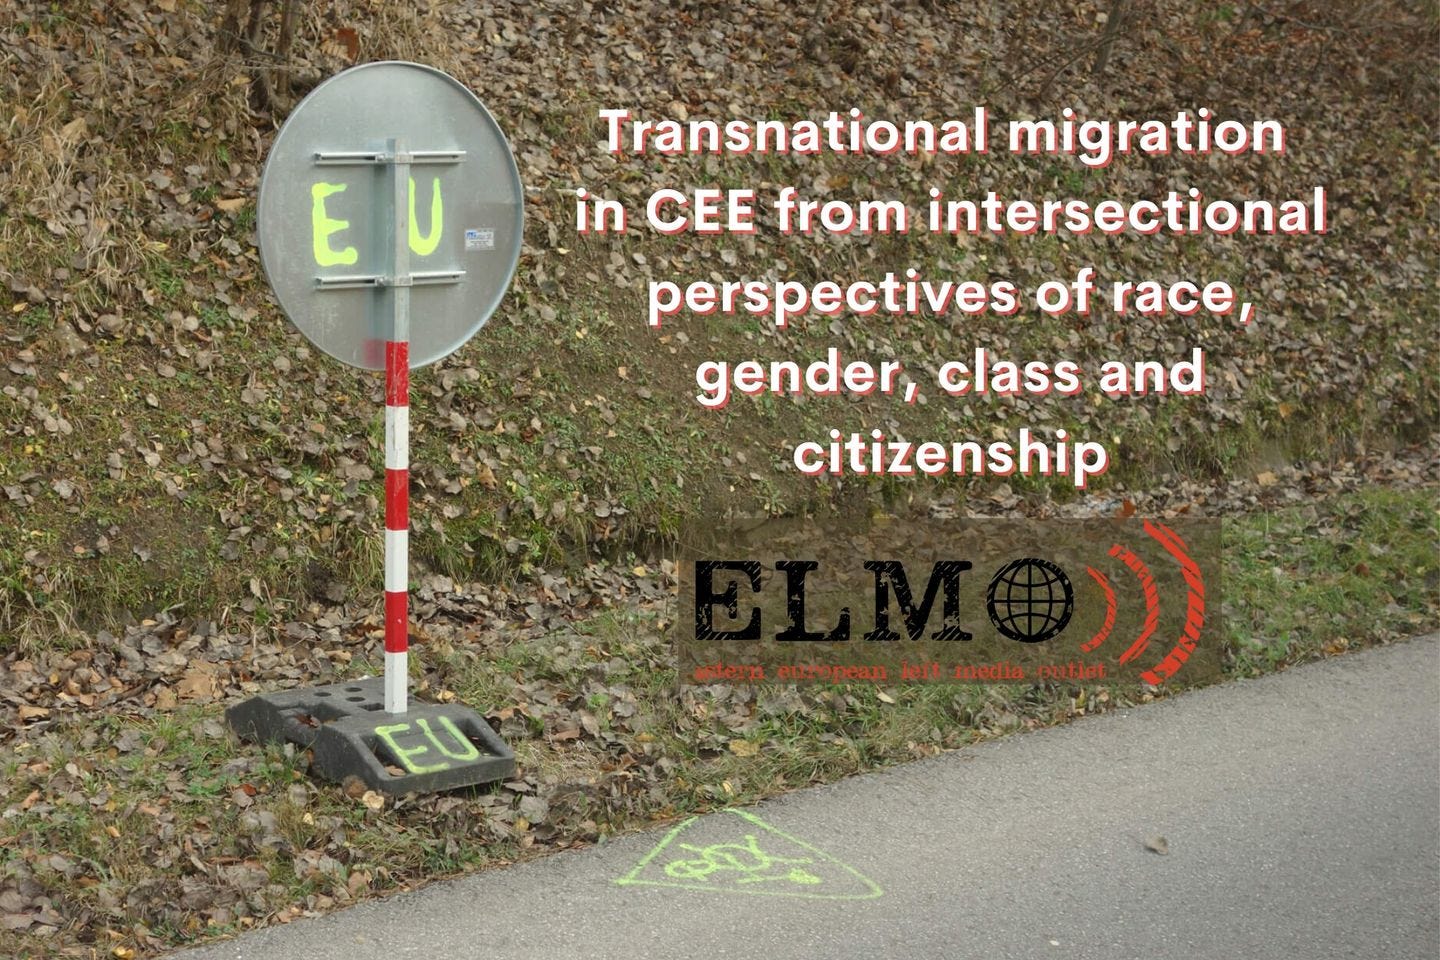 May be an image of outdoors and text that says 'EU Transnational migration in cee from intersectional perspectives of race, gender, class and citizenship teopn_d european left media EUU'